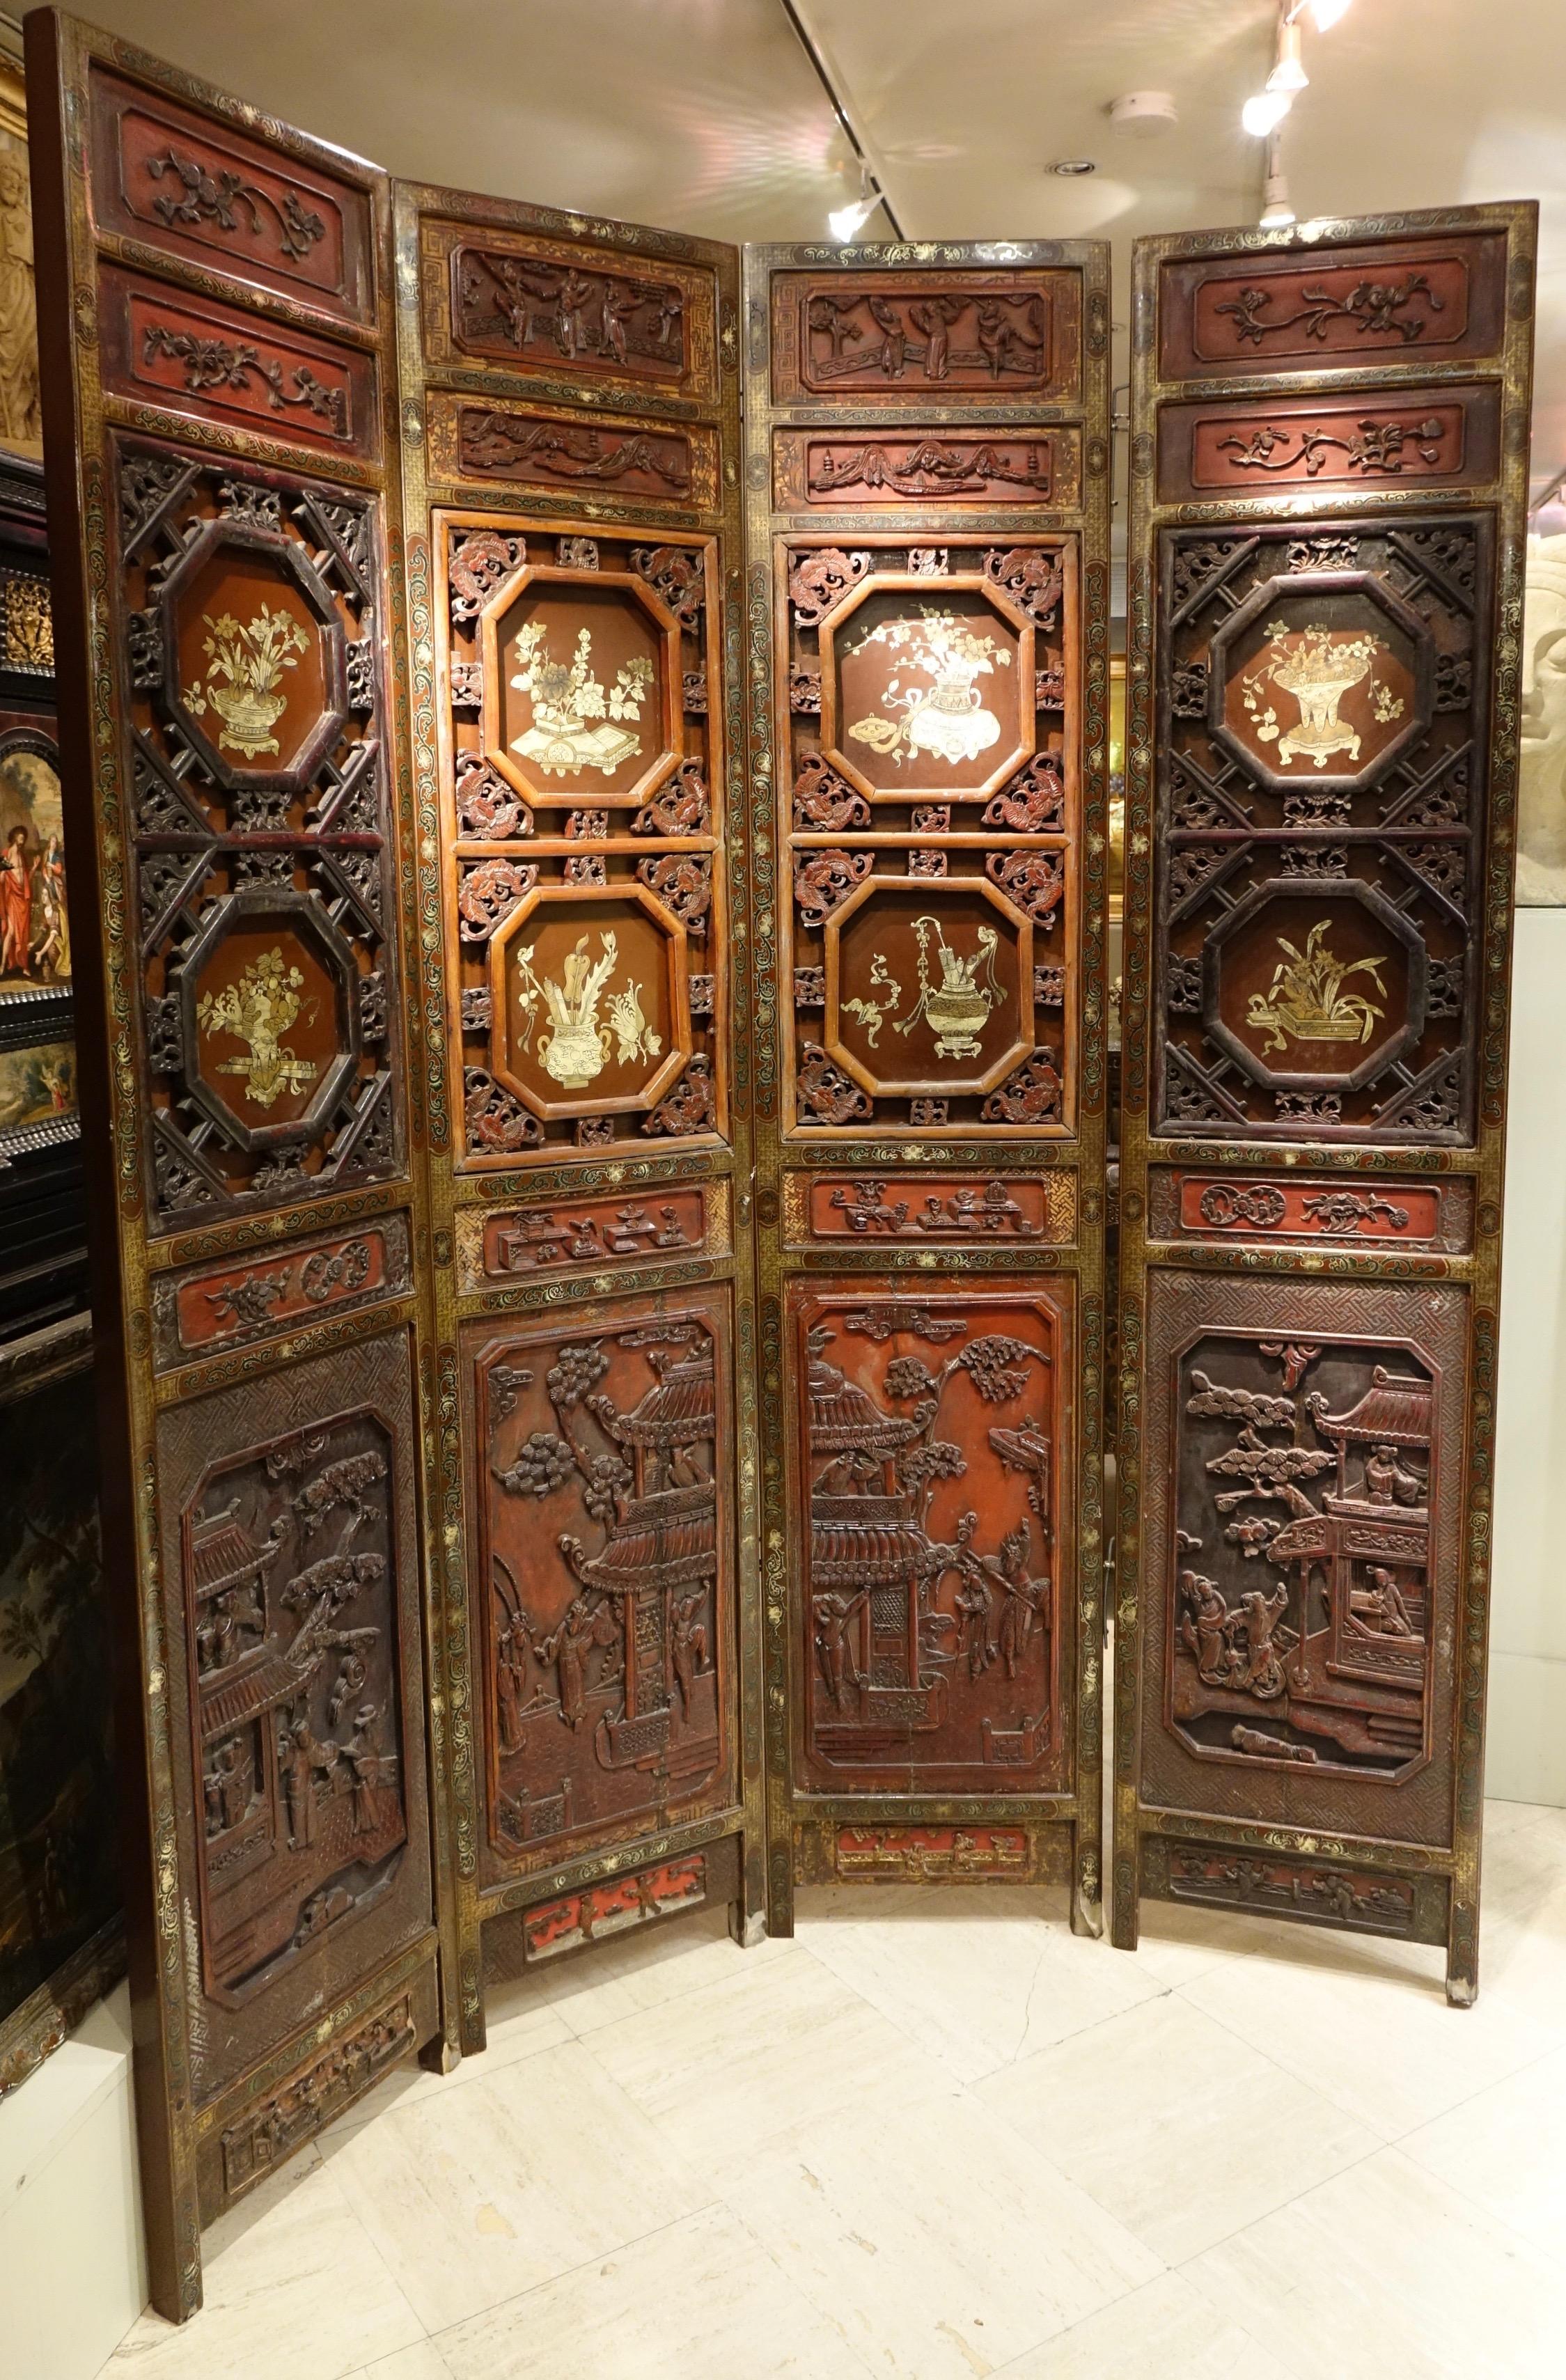 19th century Chinese screen with four panels in carved wood, red and gilt lacquer.
The eight octagonal paintings of the upper part are decorated with still life scenes,
The four registers of the lower part are carved in brown low -reliefs on a red